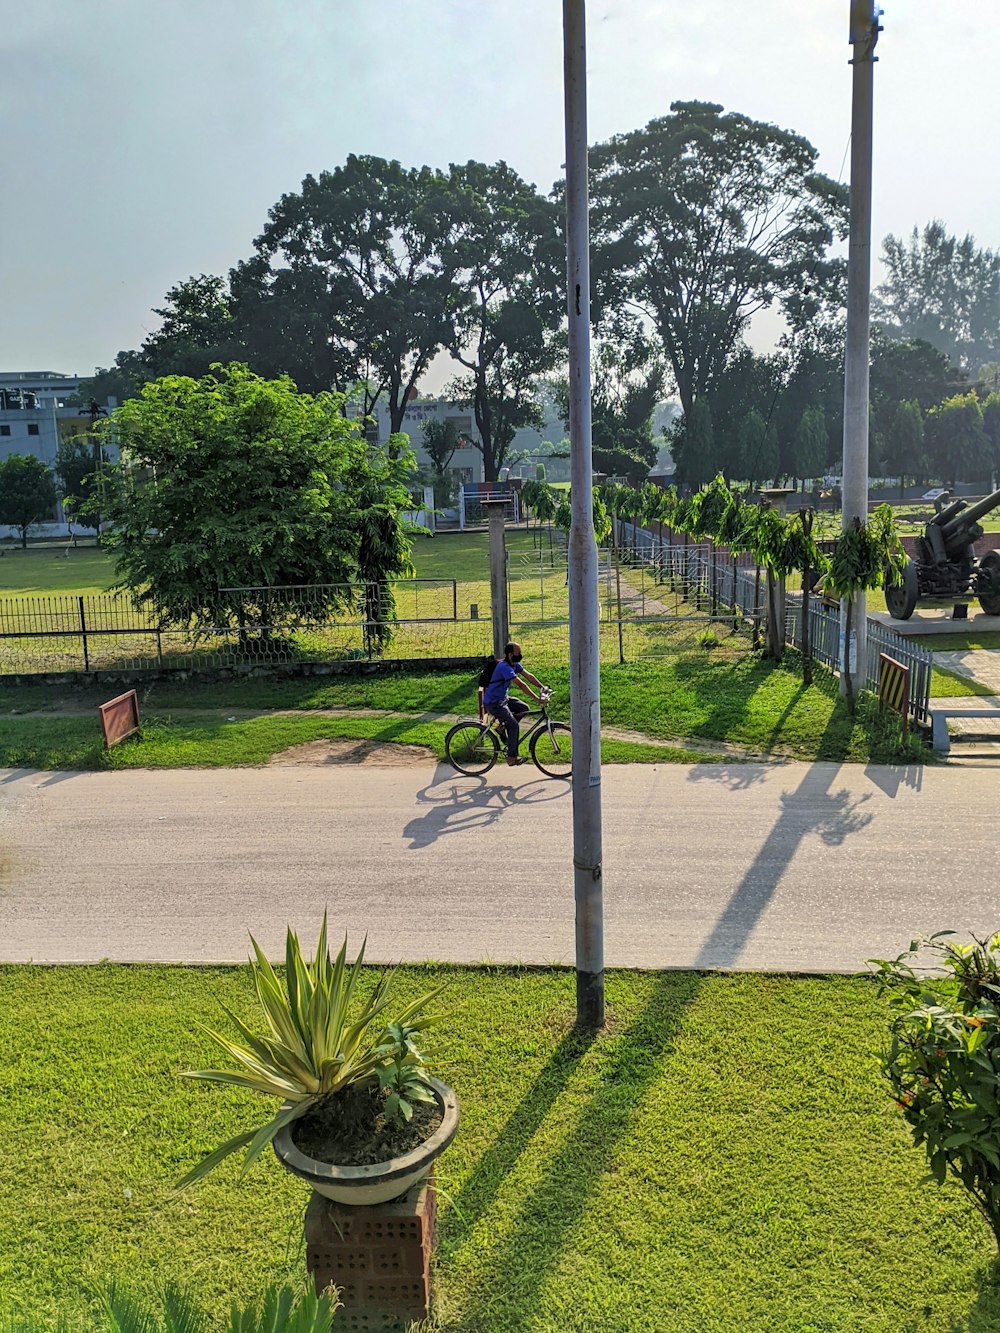 a person riding a bike on a path in a park